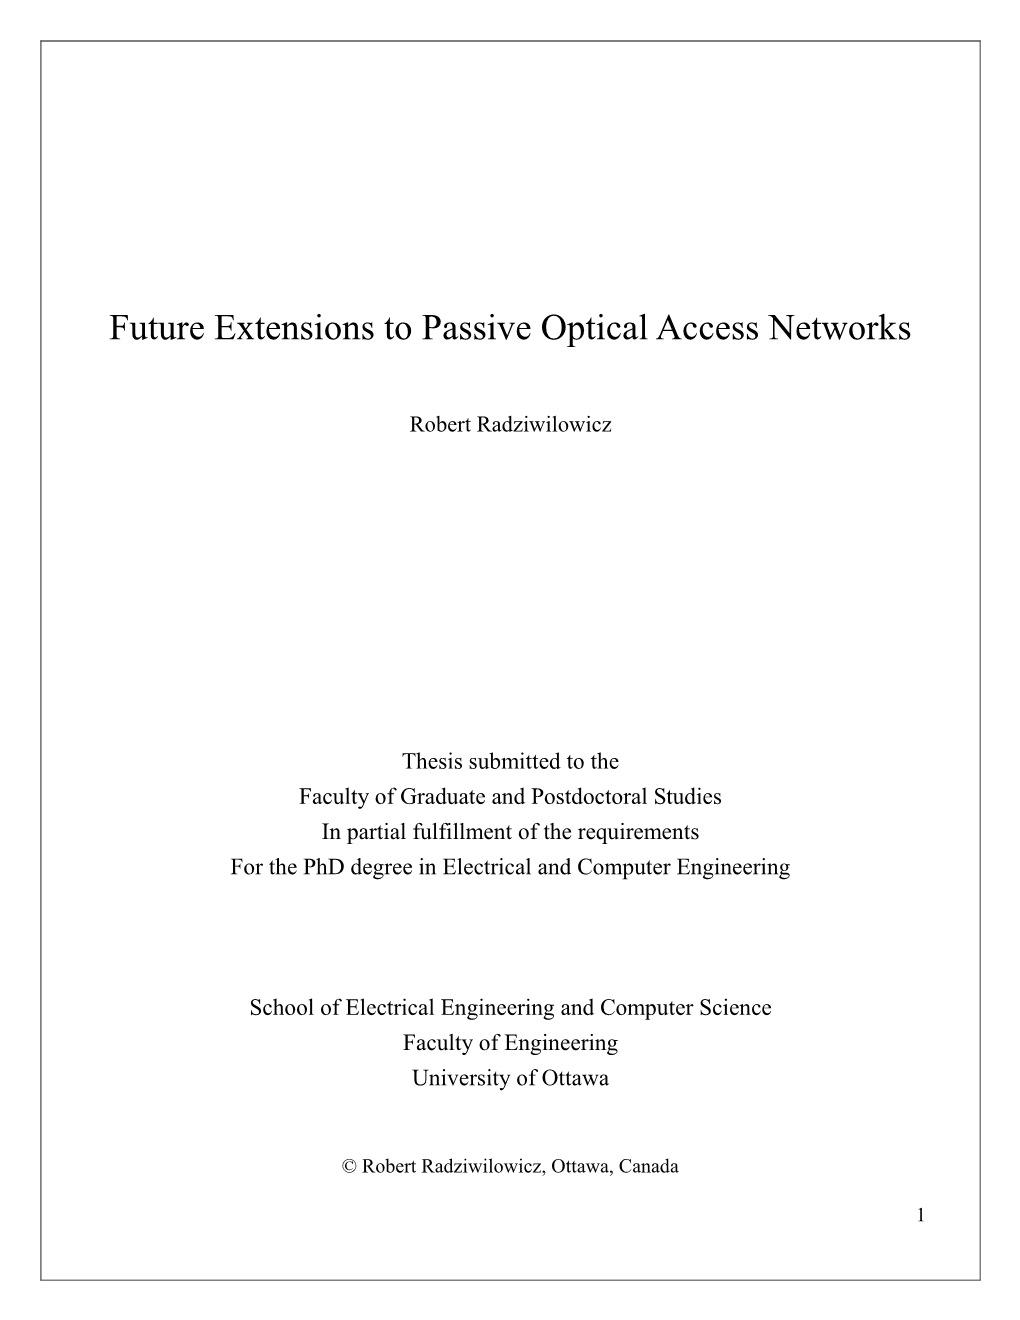 Future Extensions to Passive Optical Access Networks